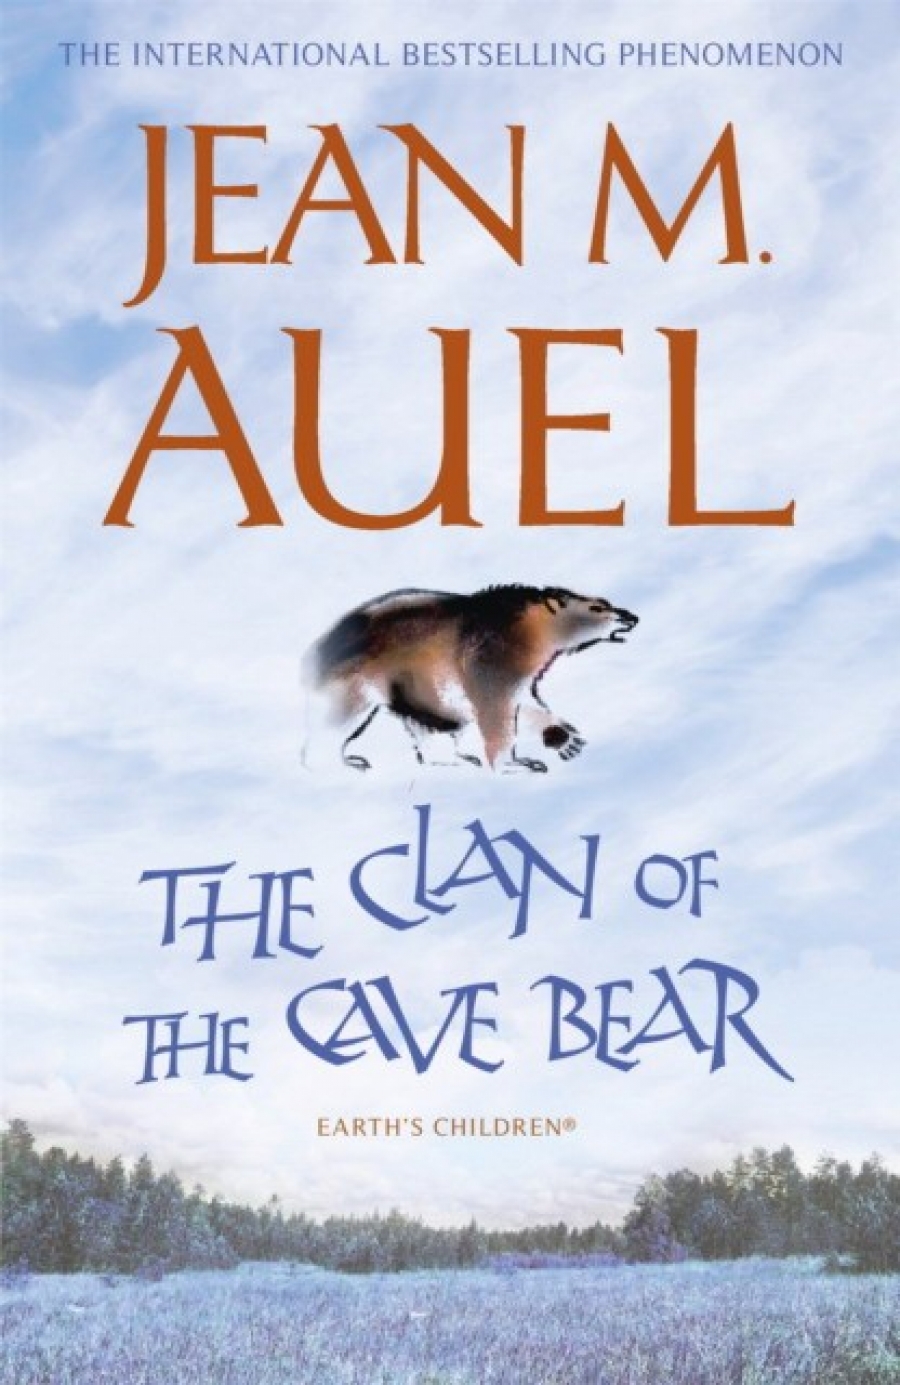 Auel, Jean M. Clan of the cave bear 